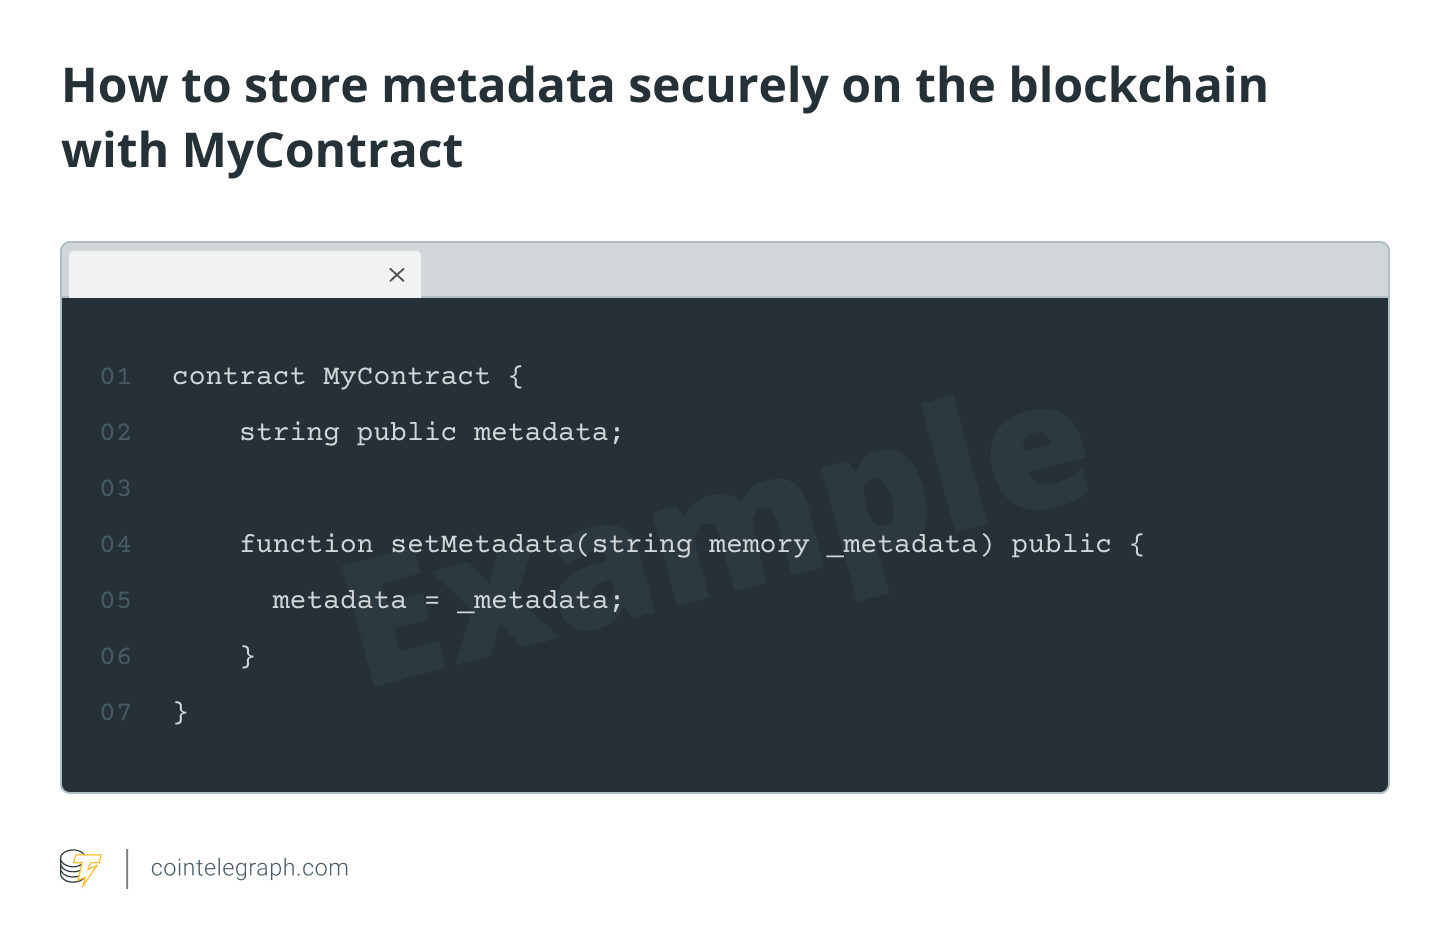 How to store metadata securely on the blockchain with MyContract